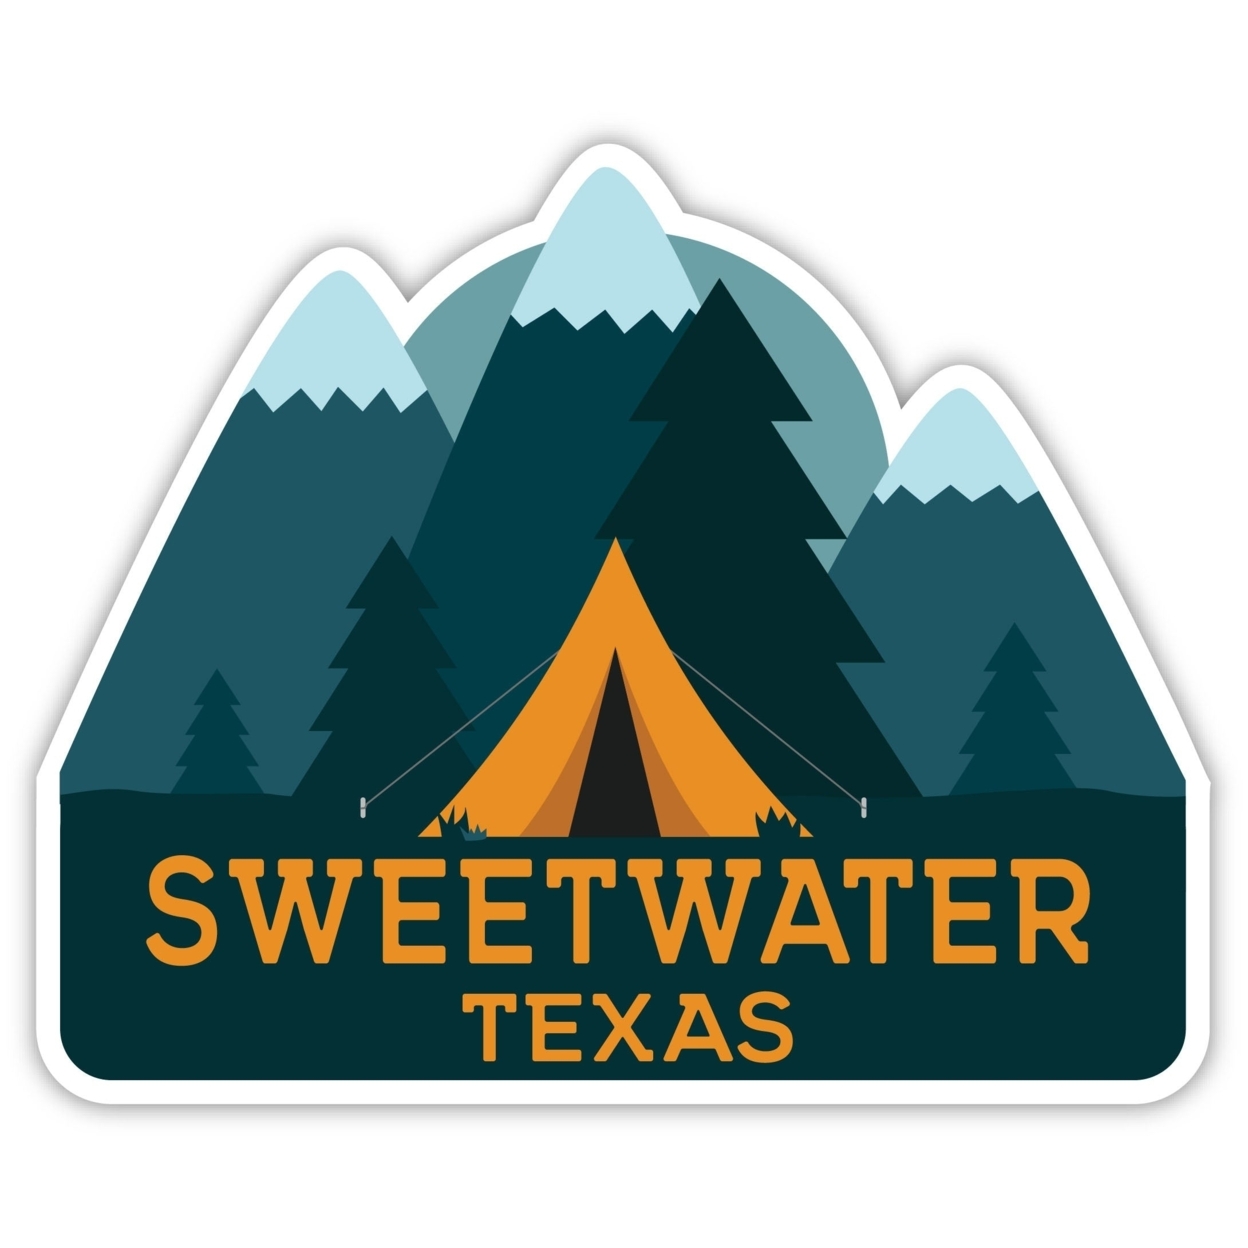 Sweetwater Texas Souvenir Decorative Stickers (Choose Theme And Size) - Single Unit, 4-Inch, Tent